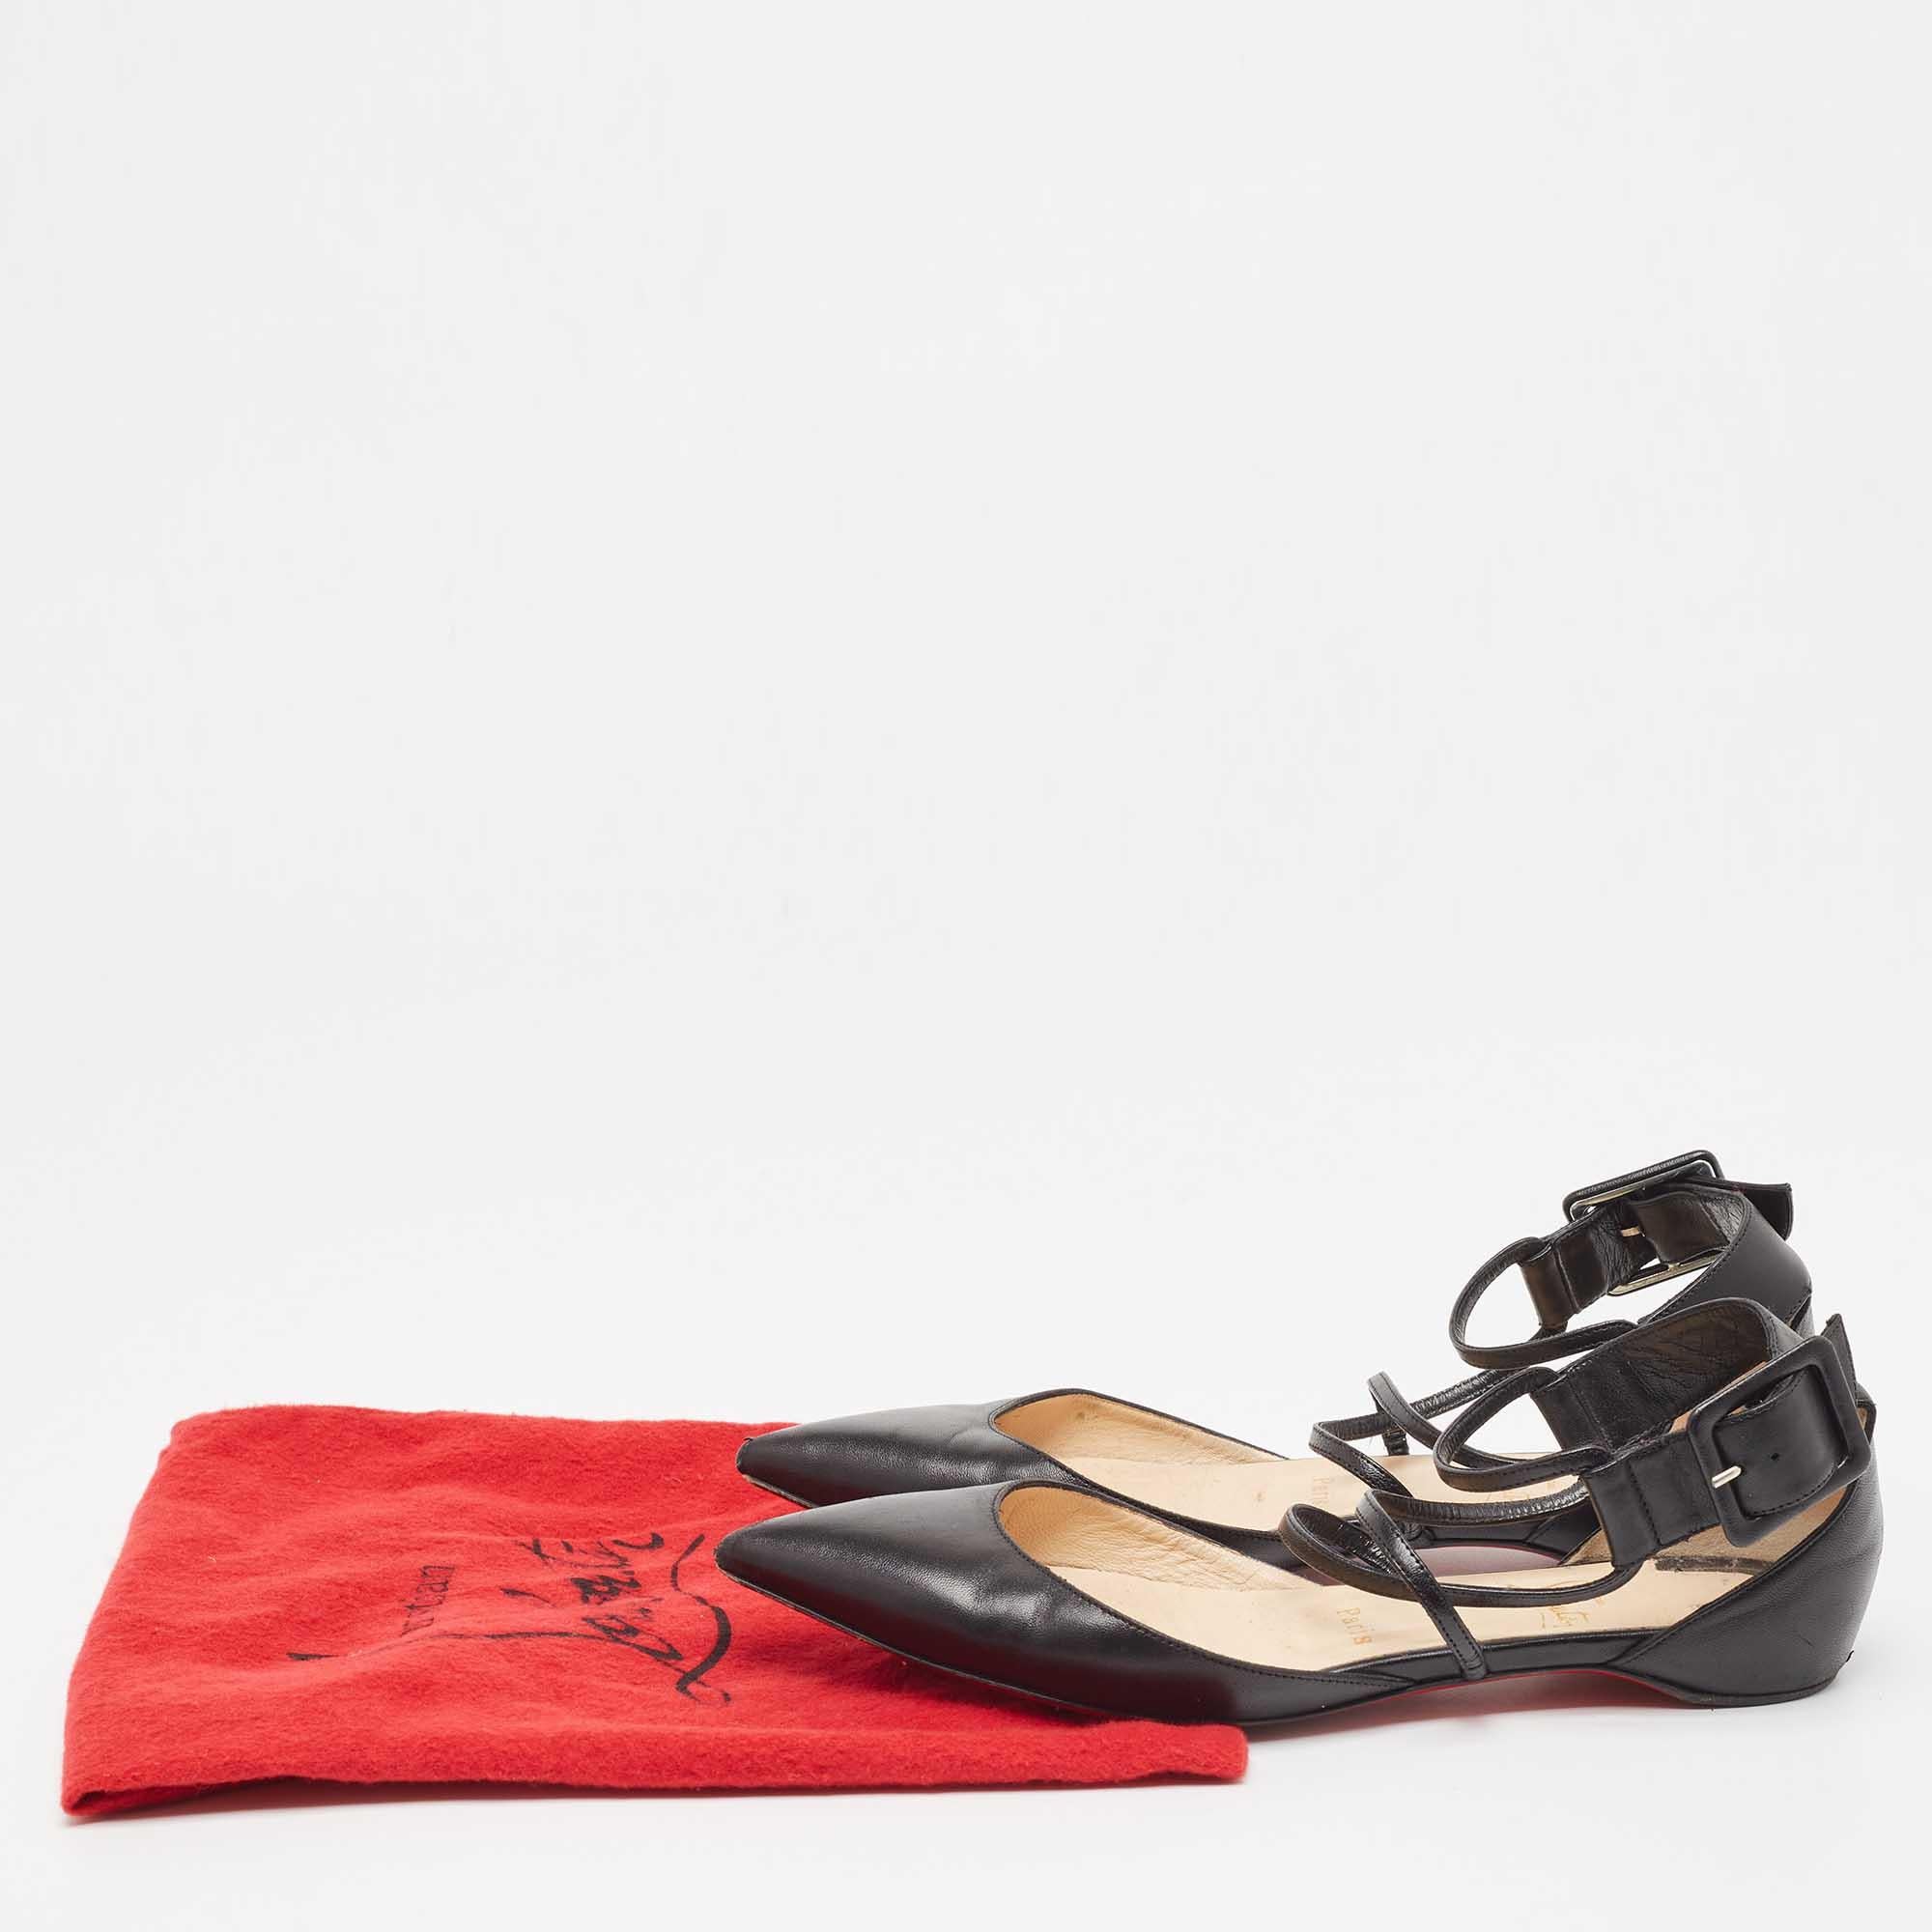 Christian Louboutin Black Leather Suzanna Ankle Strap Flats Size 37.5 For Sale 4